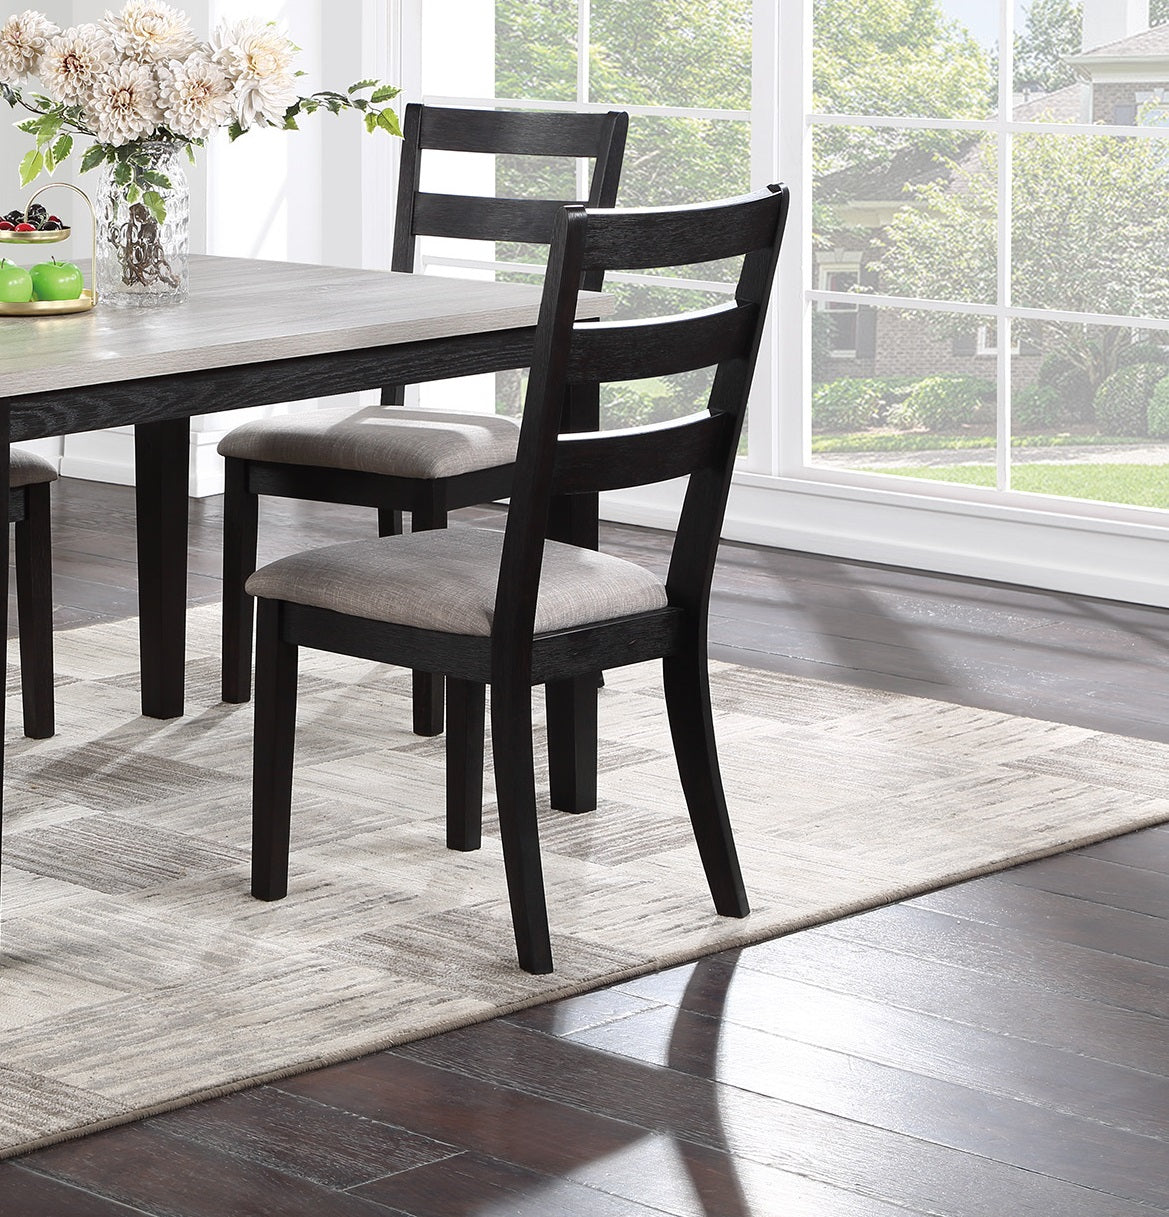 ZNTS Classic Stylish Black Finish 5pc Dining Set Kitchen Dinette Wooden Top Table and Chairs Upholstered B011119011